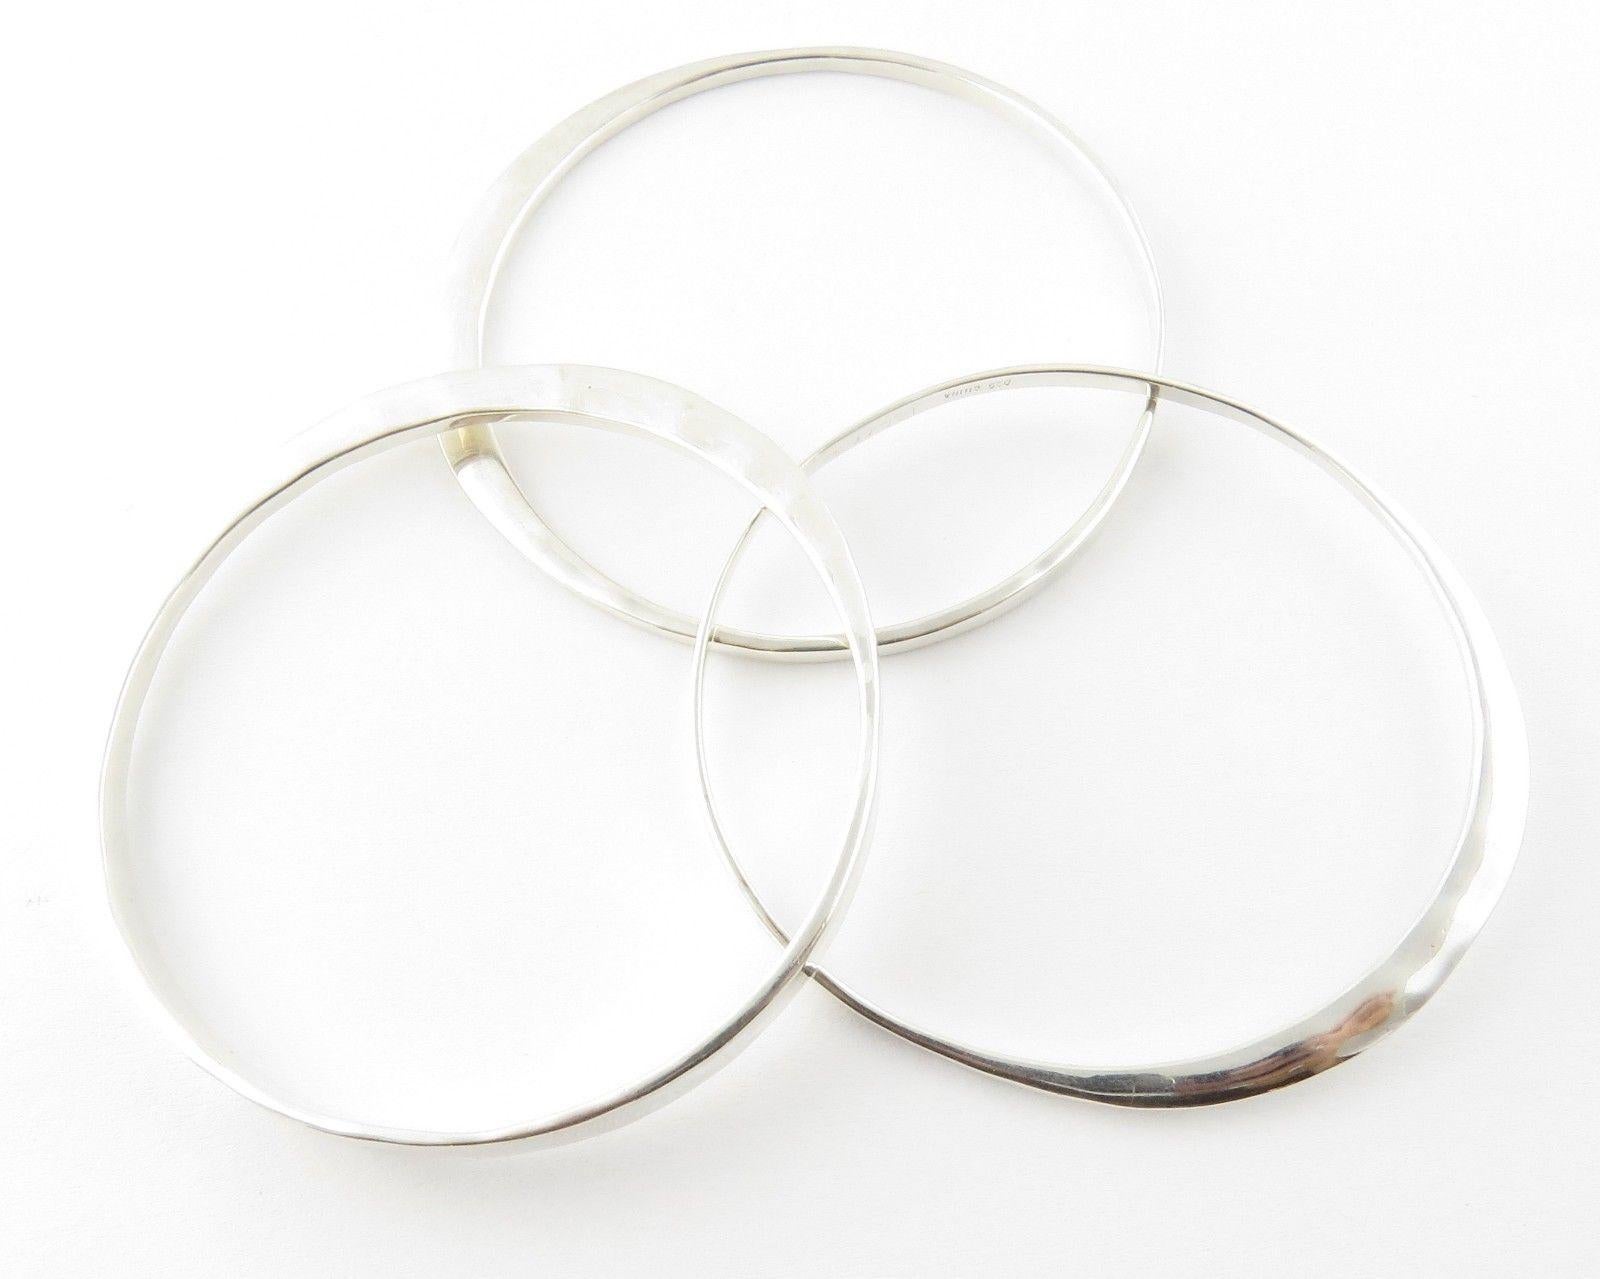 Robert Lee Morris Set of 3 Sterling Silver Hammered Bangle Bracelets

This is a set of 3 beautiful sterling silver hammered bangle bracelets by Robert Lee Morris.

Measurement: Approx 7 3/4 inches.  Each measure approx. 2 1/2 inches across the